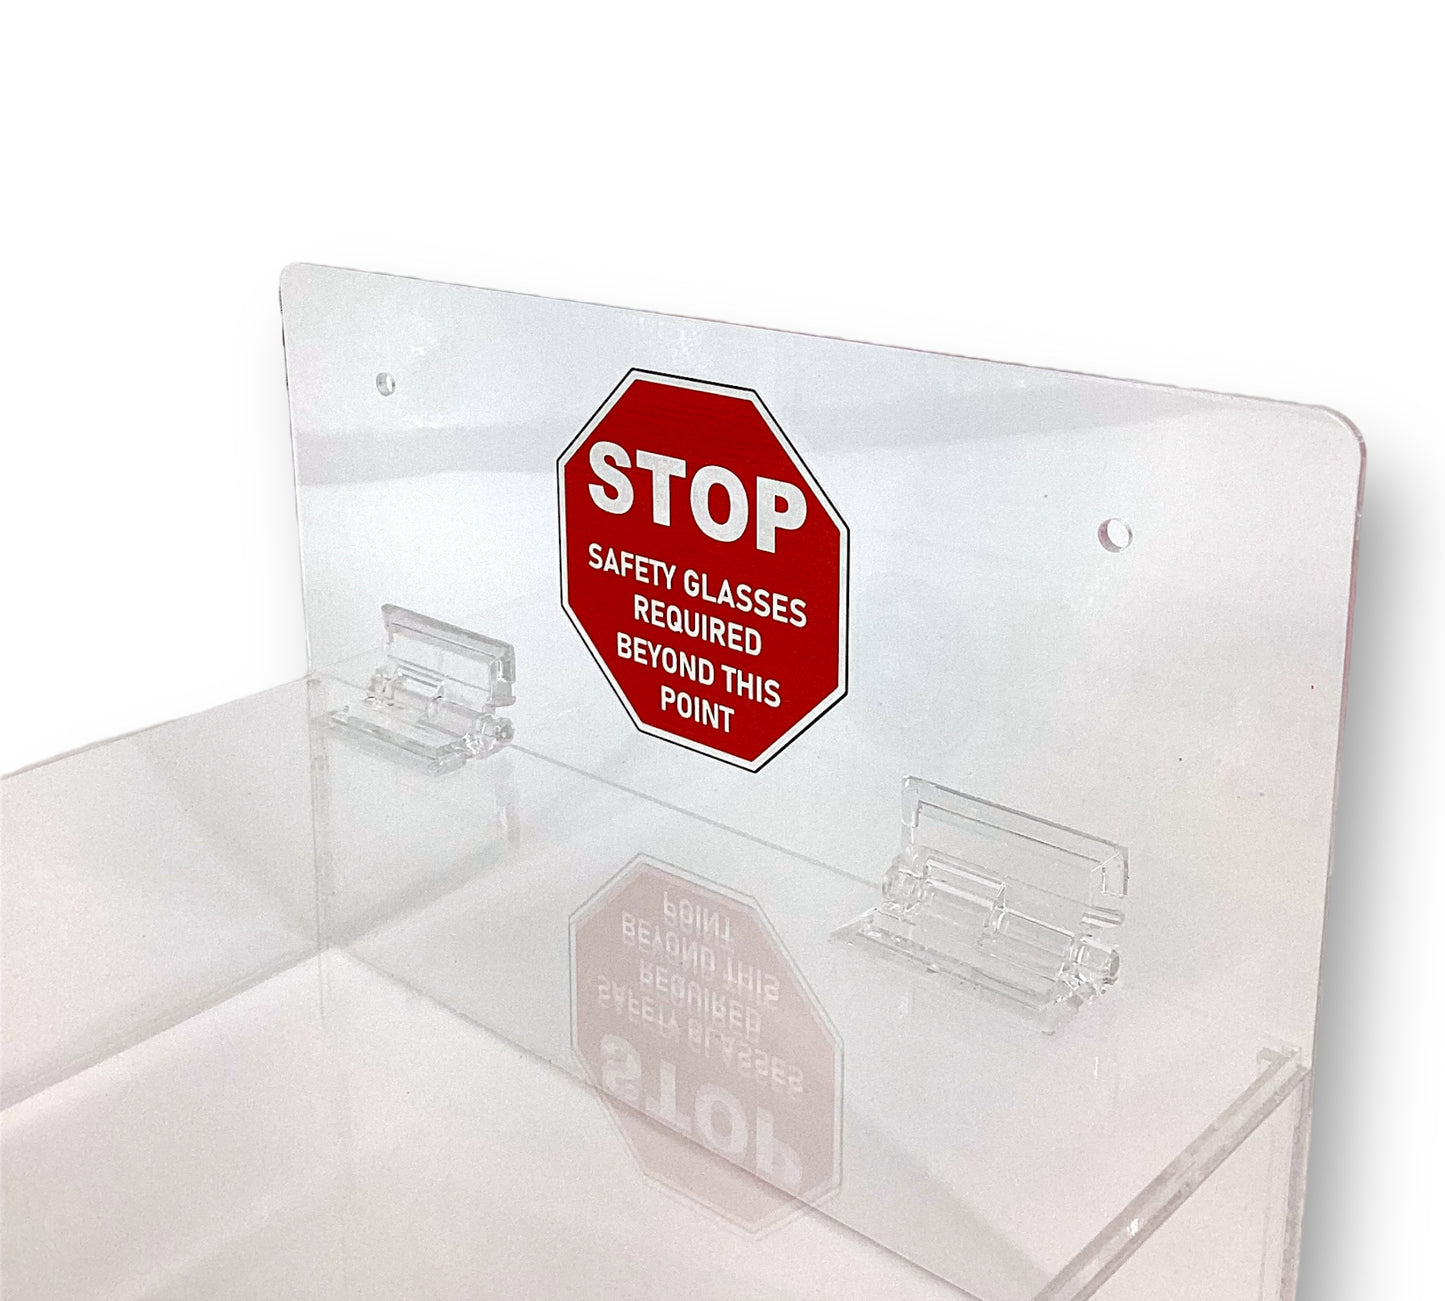 Clear Acrylic Wall Mountable Safety Glasses Dispenser w/ Hinged Lid - Blue